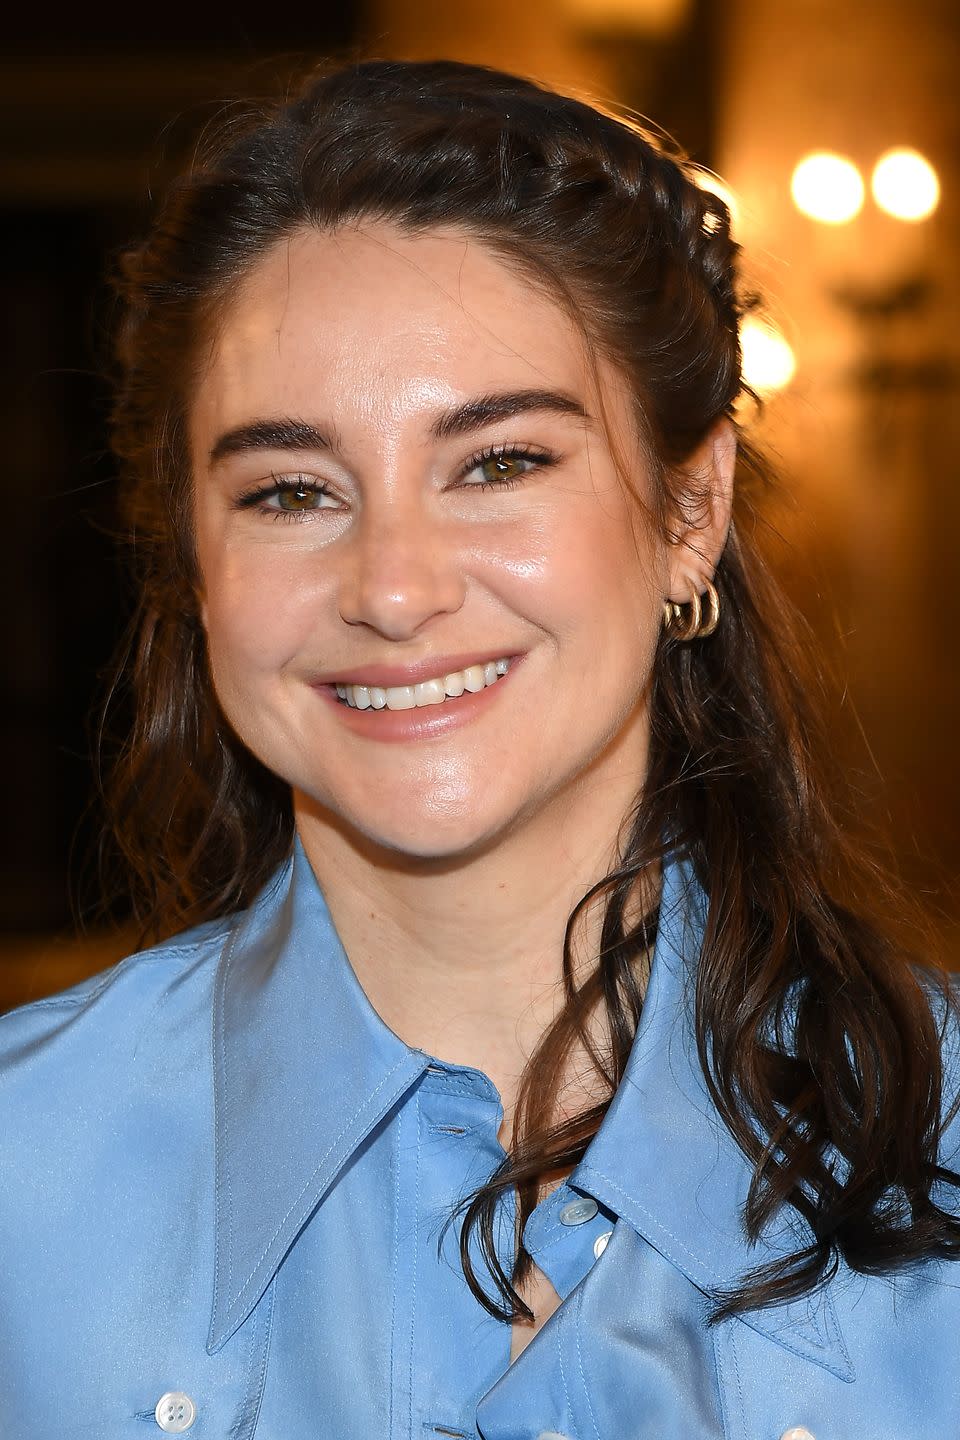 <p>In a 2014 interview with <a href="https://www.marieclaire.com/celebrity/a9208/shailene-woodley-april-cover-feature-interview/" rel="nofollow noopener" target="_blank" data-ylk="slk:Marie Claire" class="link rapid-noclick-resp">Marie Claire</a>, the Big Little Lies actress spoke about not settling for sub-par relationships, saying: 'I just haven't met anyone where I was like, "wow, I could definitely see myself spending a season of my life with you." I don't even know if humans are genetically made to be with one person forever.' Makes sense.</p>